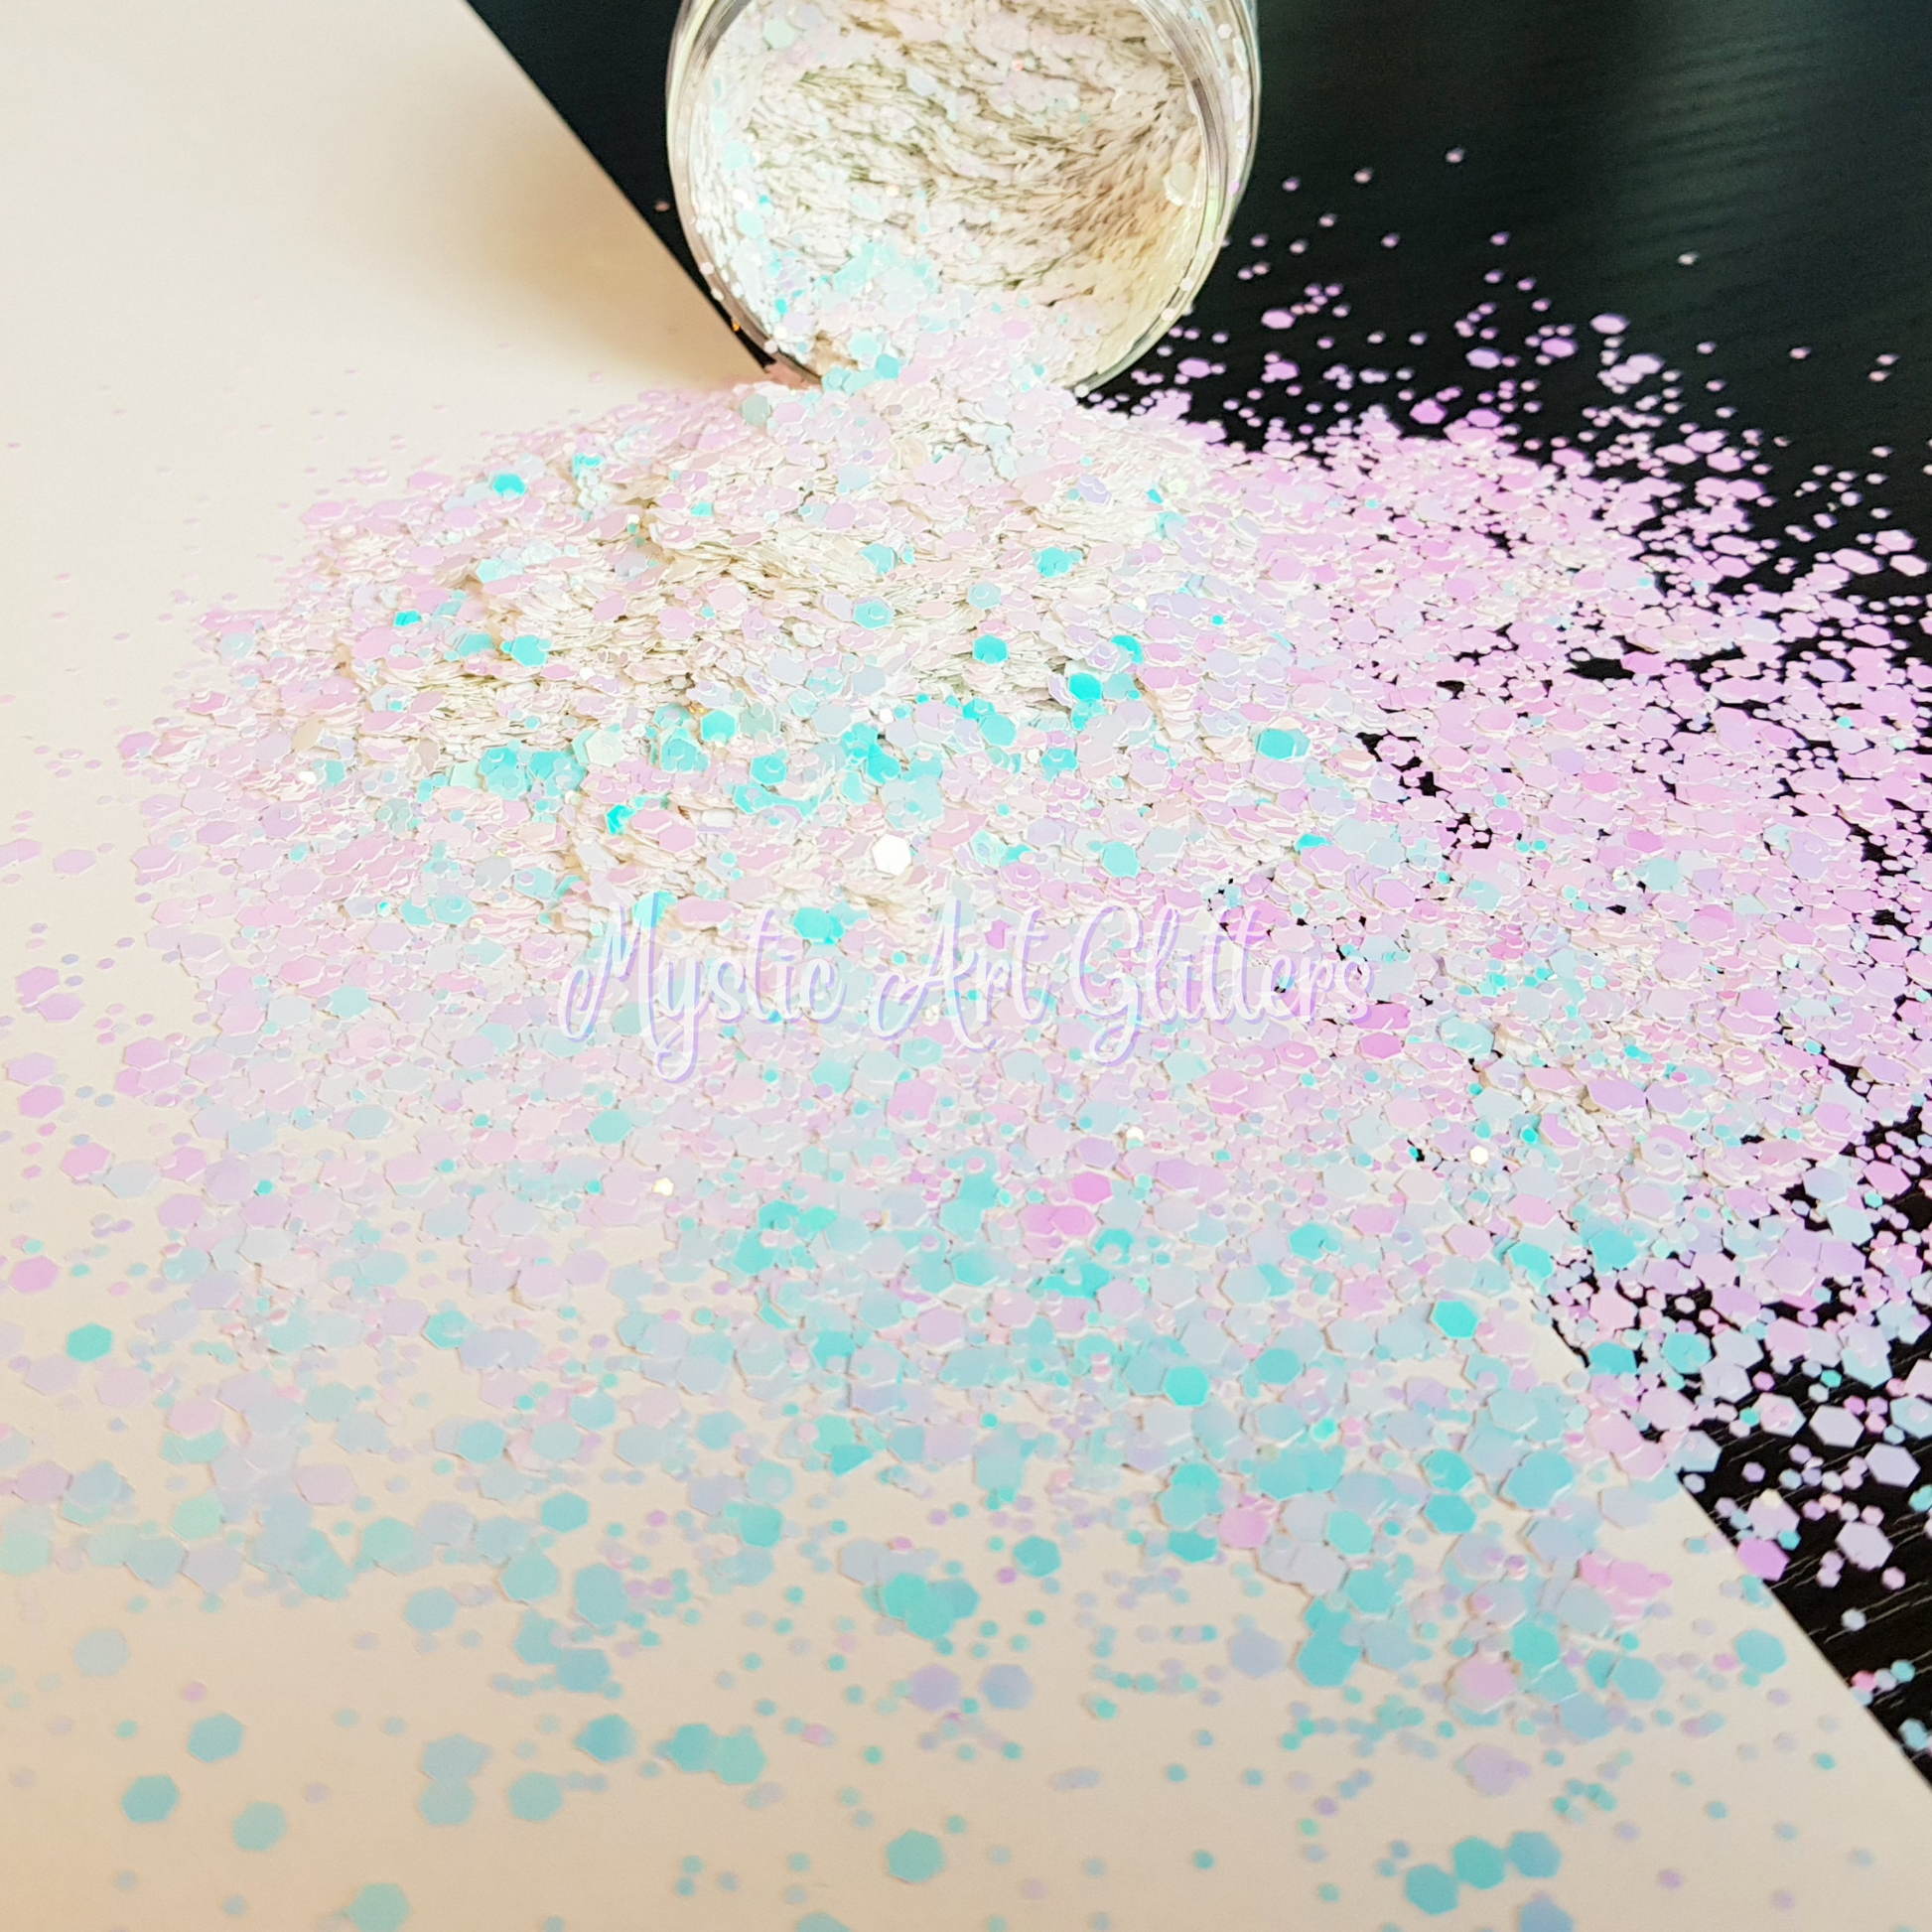 Moonstone pearlescent opalescent glitter